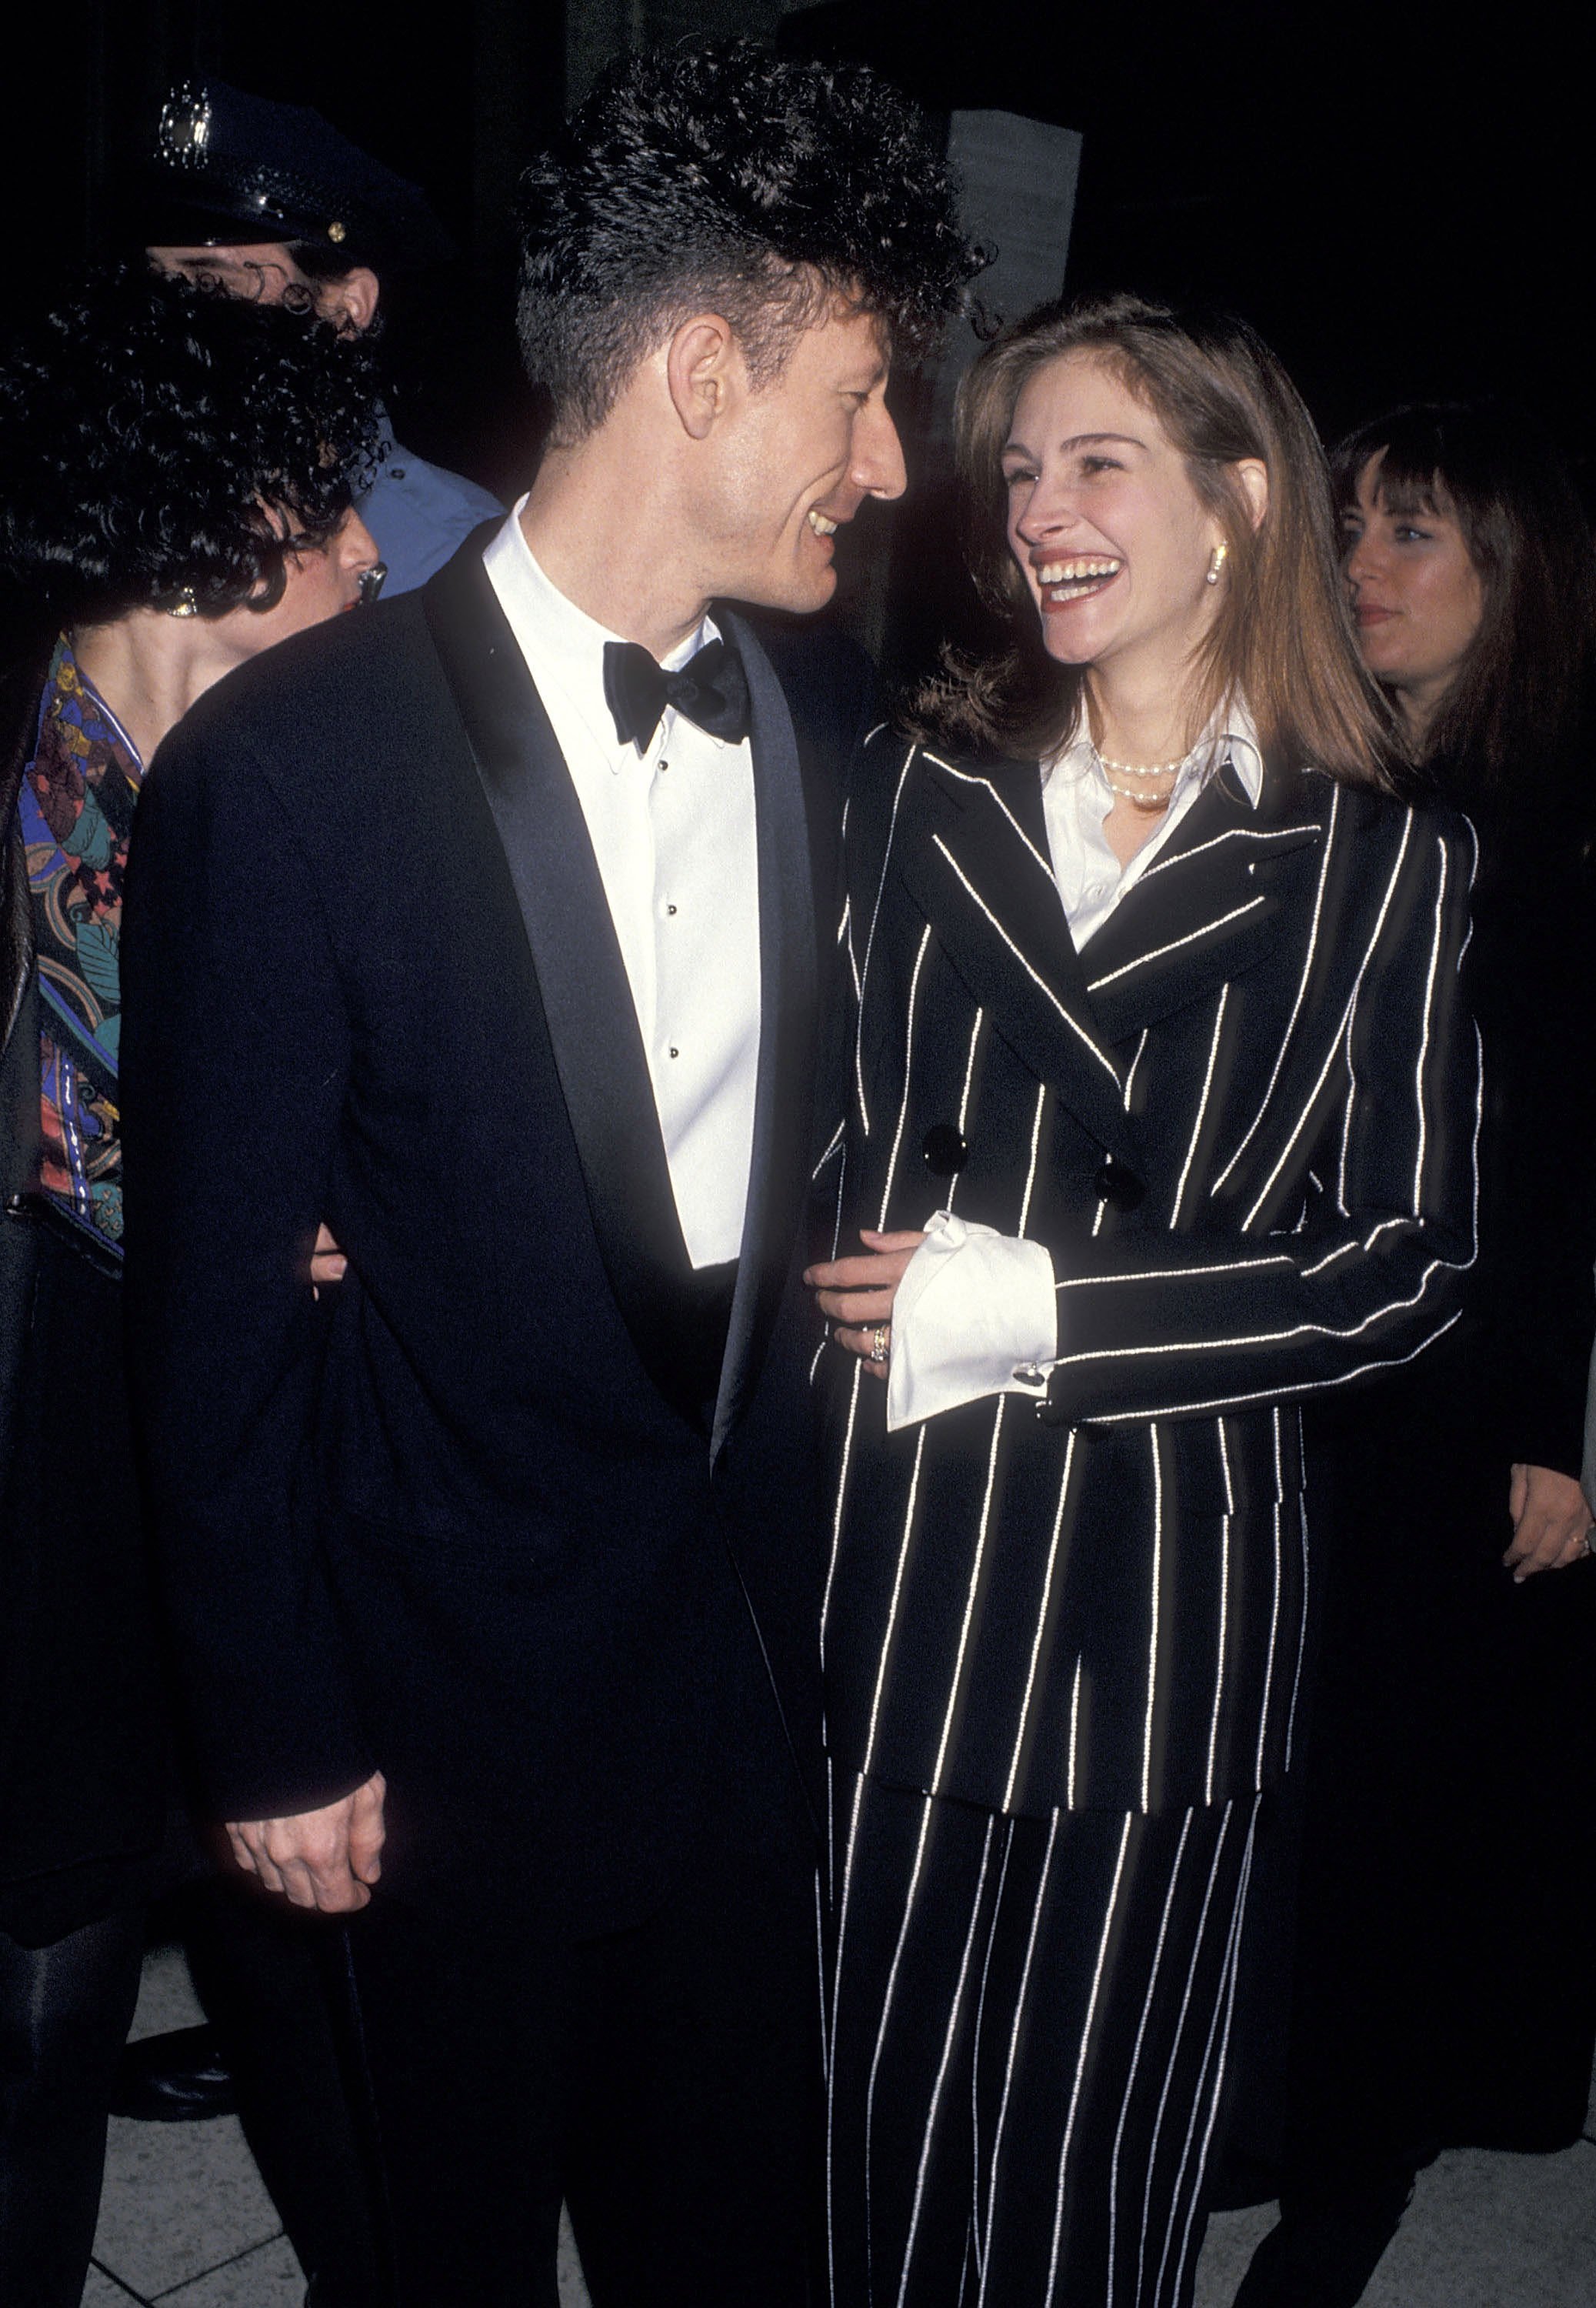 Lyle Lovett and Julia Roberts during the 31st Annual New York Film Festival Opening Night - "Short Cuts" Screening at Avery Fisher Hall, Lincoln Center on October 1, 1993 in New York City. / Source: Getty Images